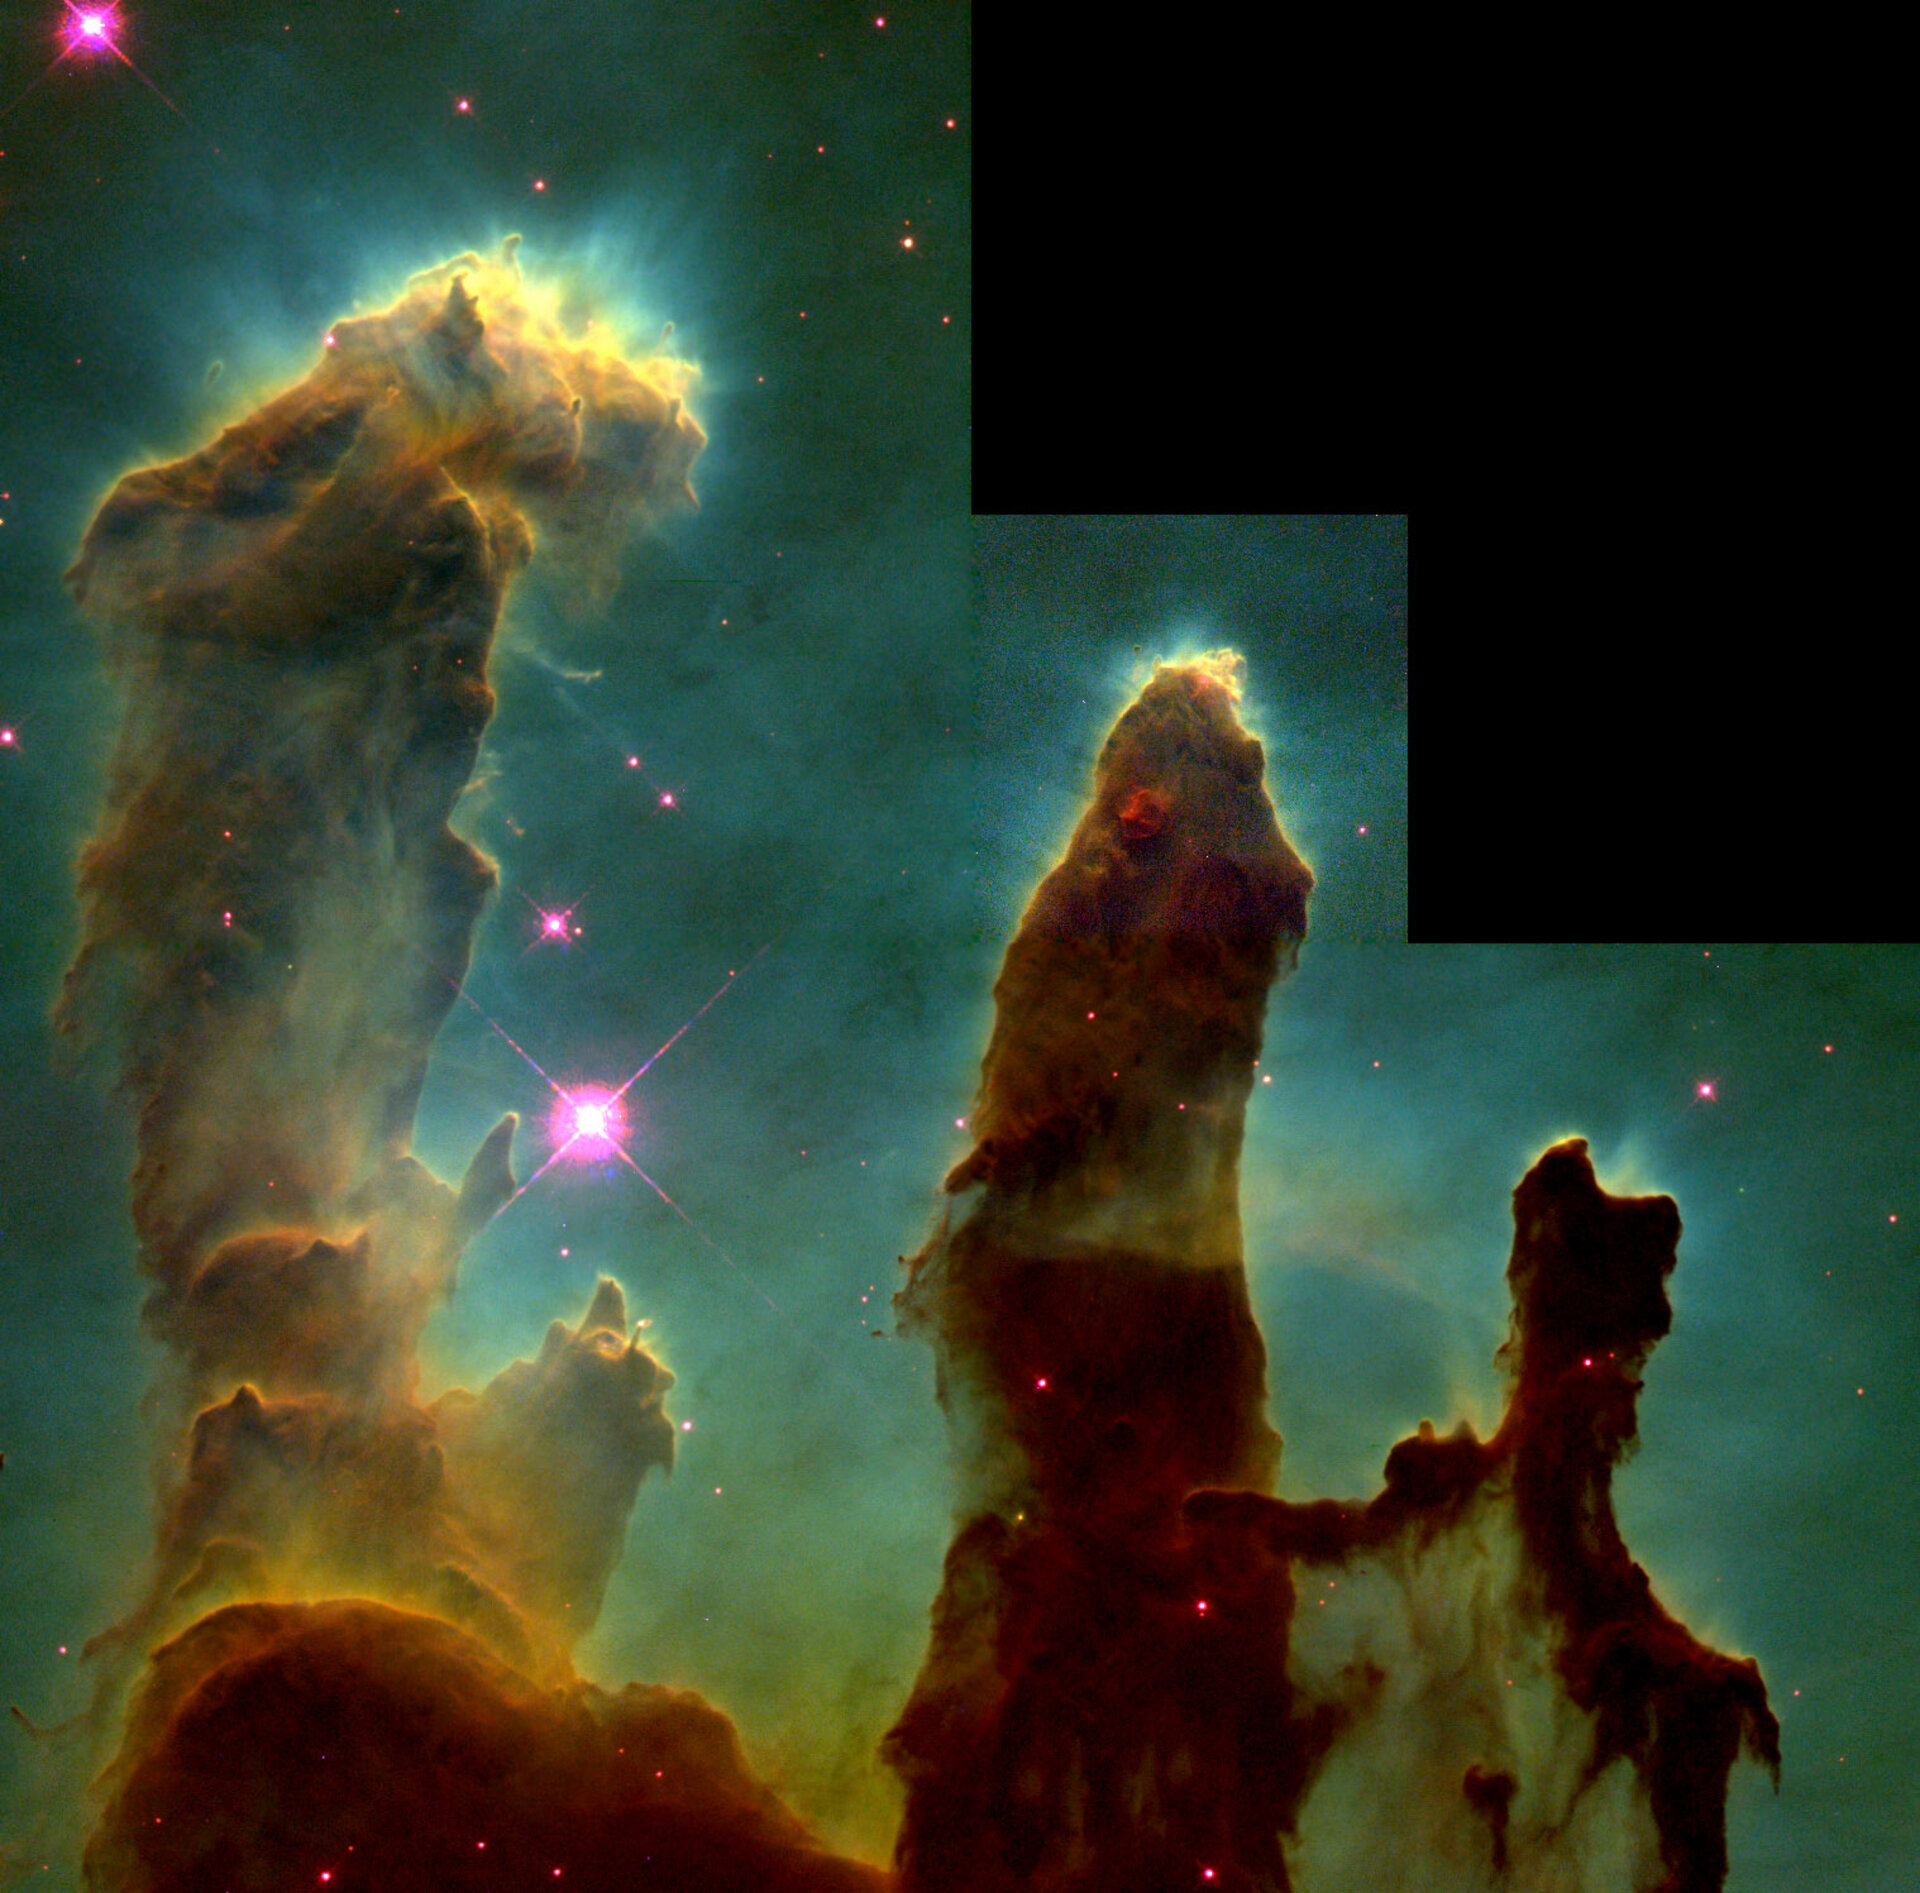 Interstellar hydrogen gas and dust appear to stand like columns